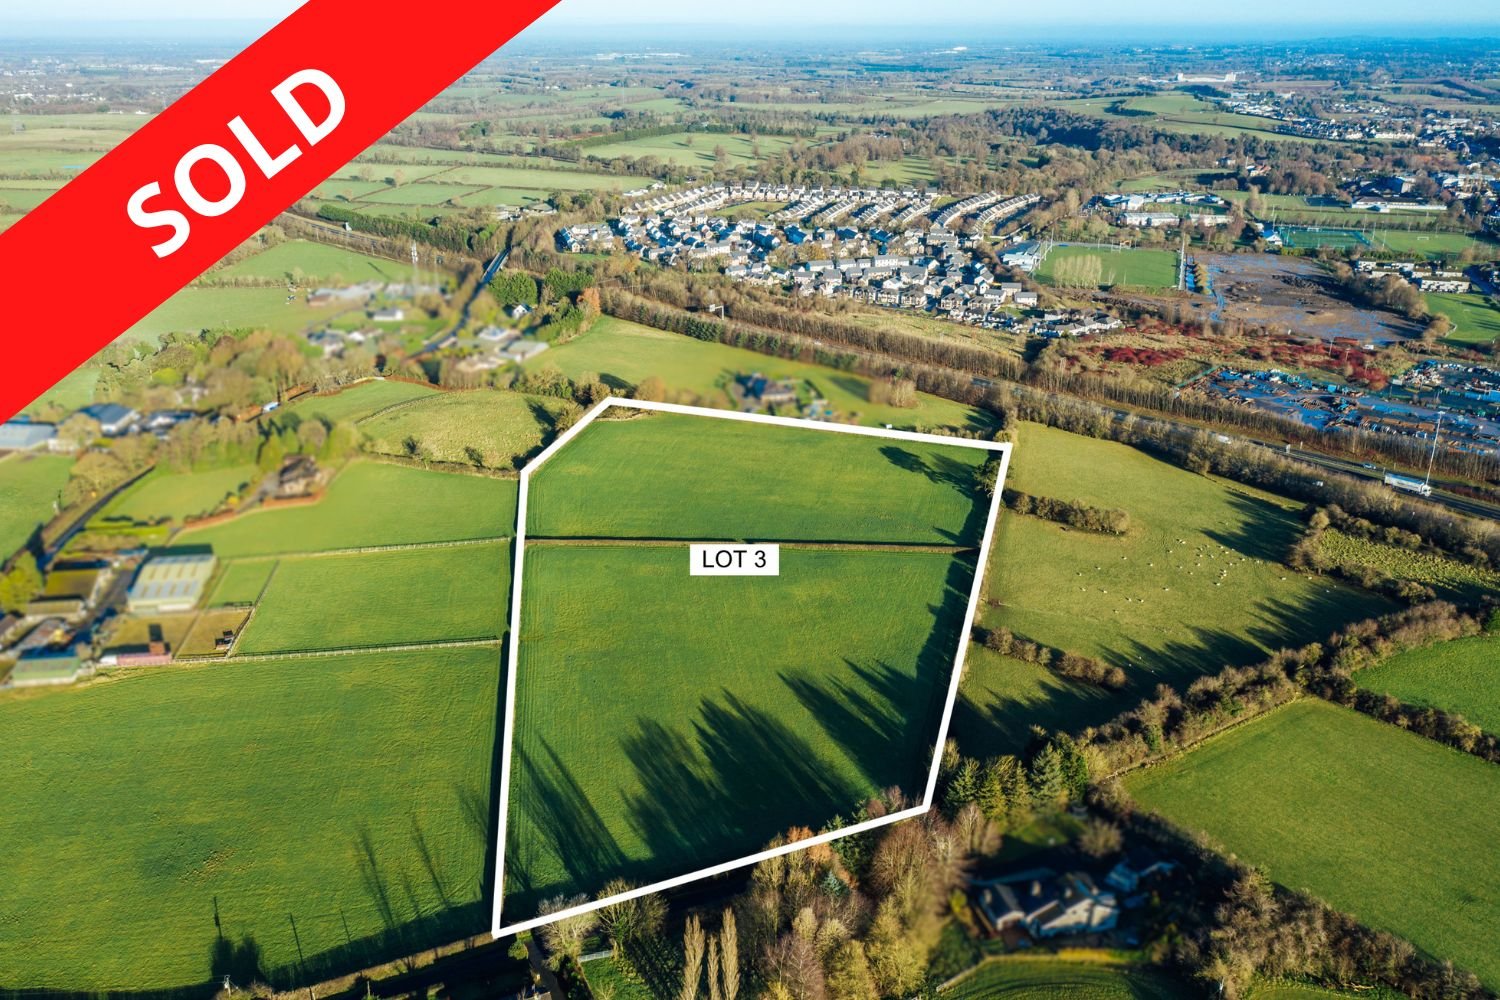 Sold - 11 Acres, Sunnyhill.jpg